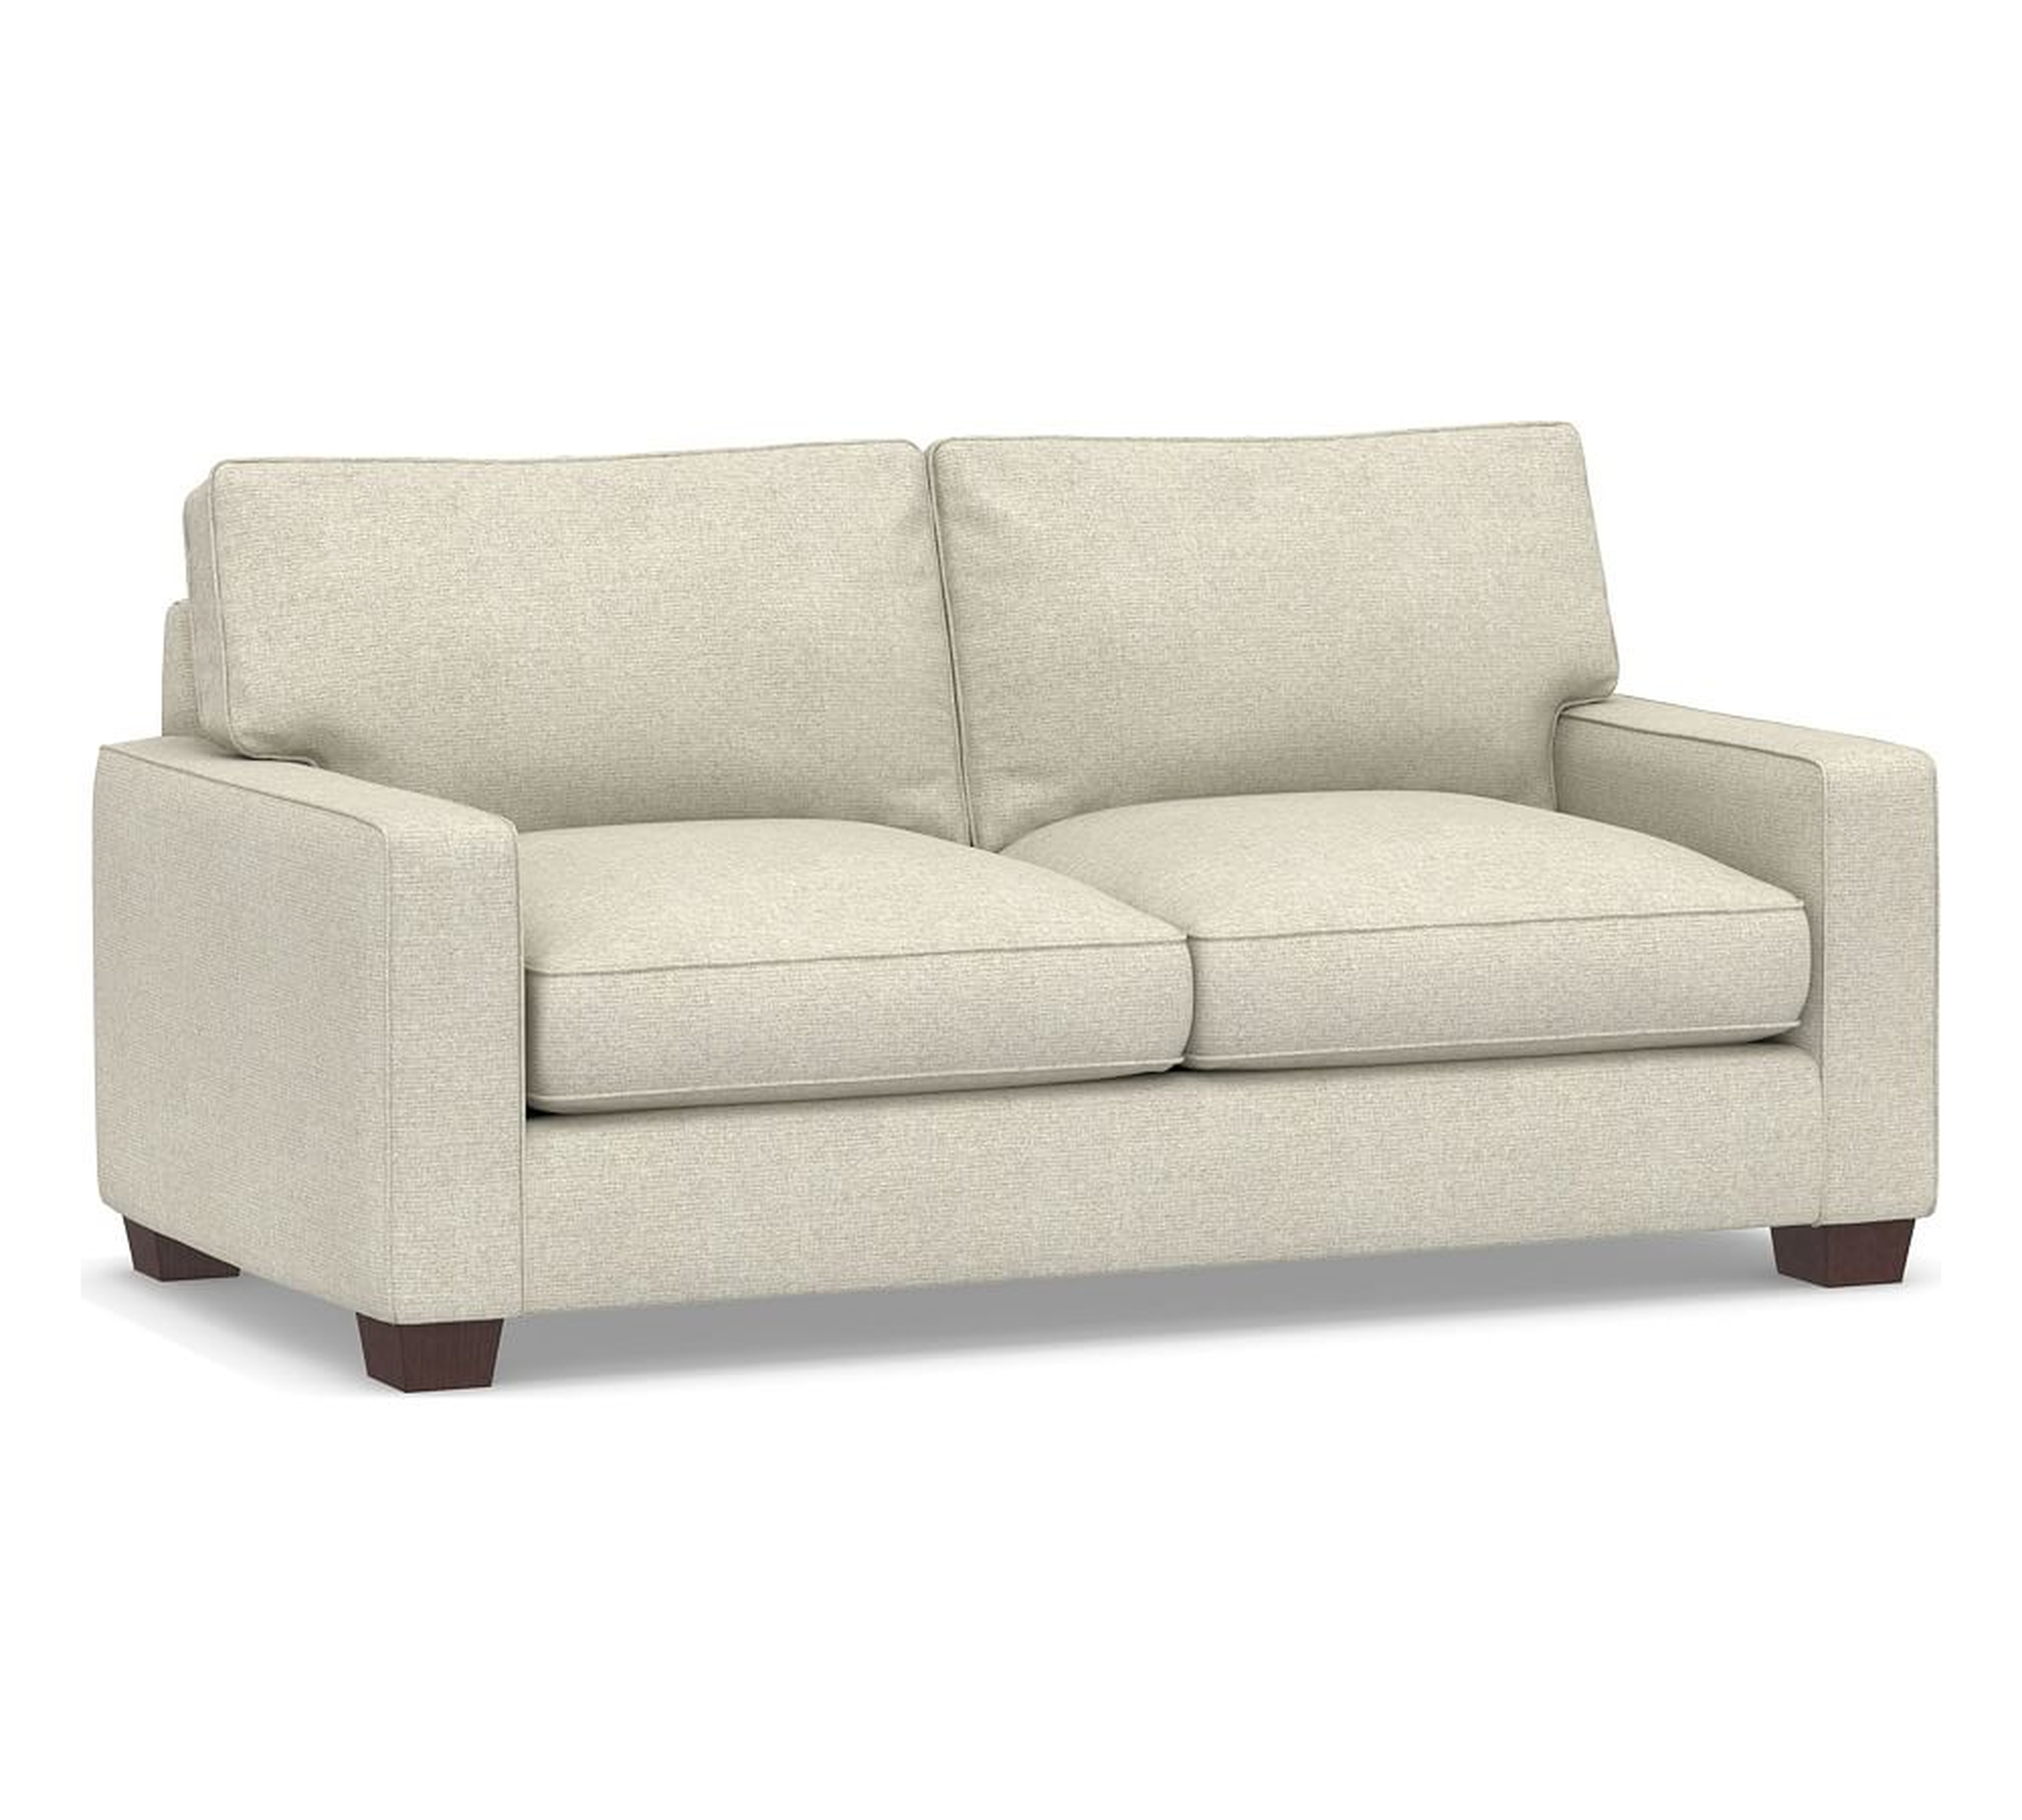 PB Comfort Square Arm Upholstered Sofa 76.5", Box Edge, Down Blend Wrapped Cushions, Performance Heathered Basketweave Alabaster White - Pottery Barn